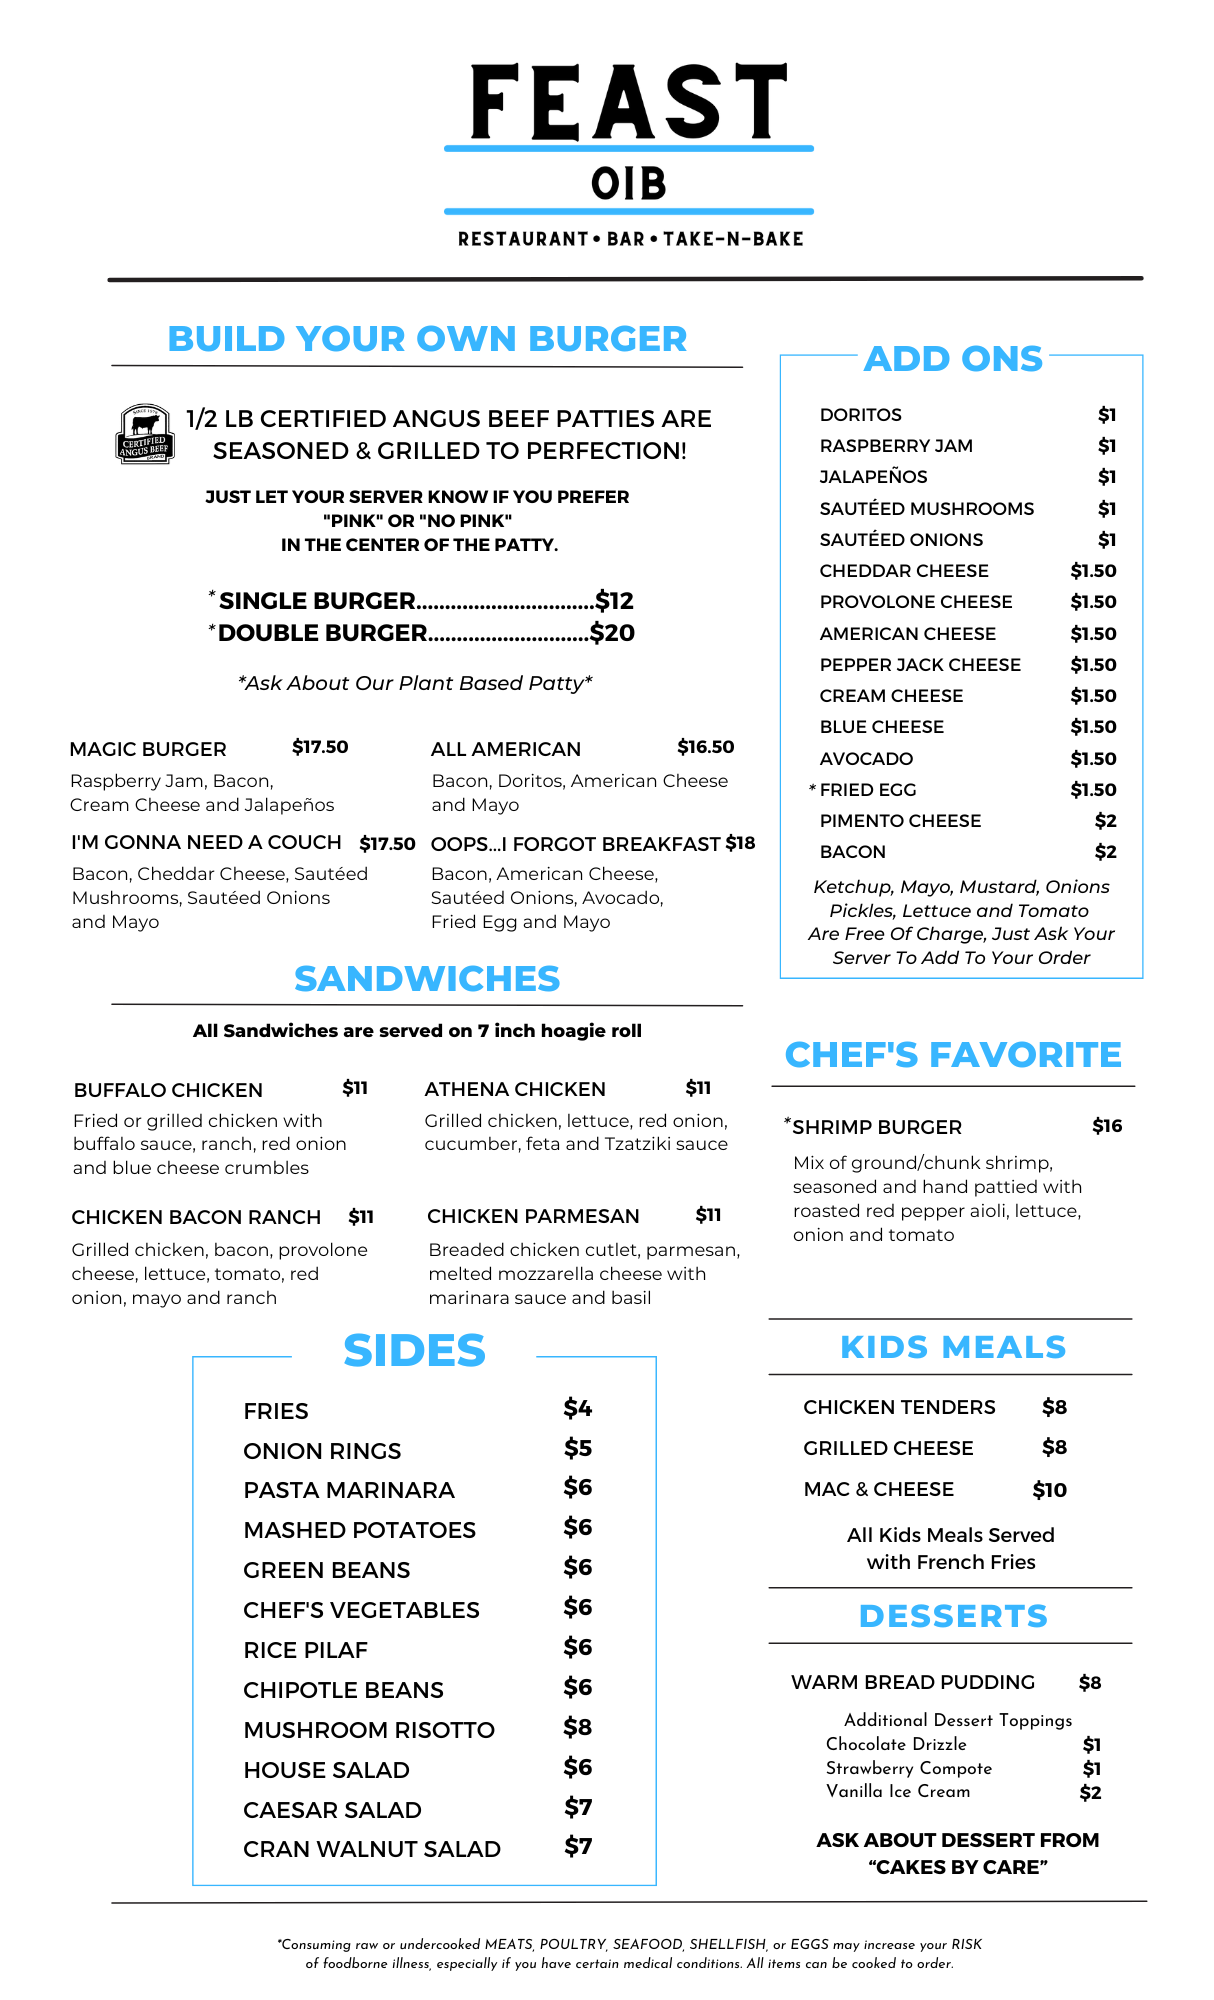 Menu for Feast OIB restaurant featuring food categories: Build Your Own Burger, Sandwiches, Sides, Add Ons, Chef's Favorite, and Kids Meals. Pricing and meal options are detailed under each category.